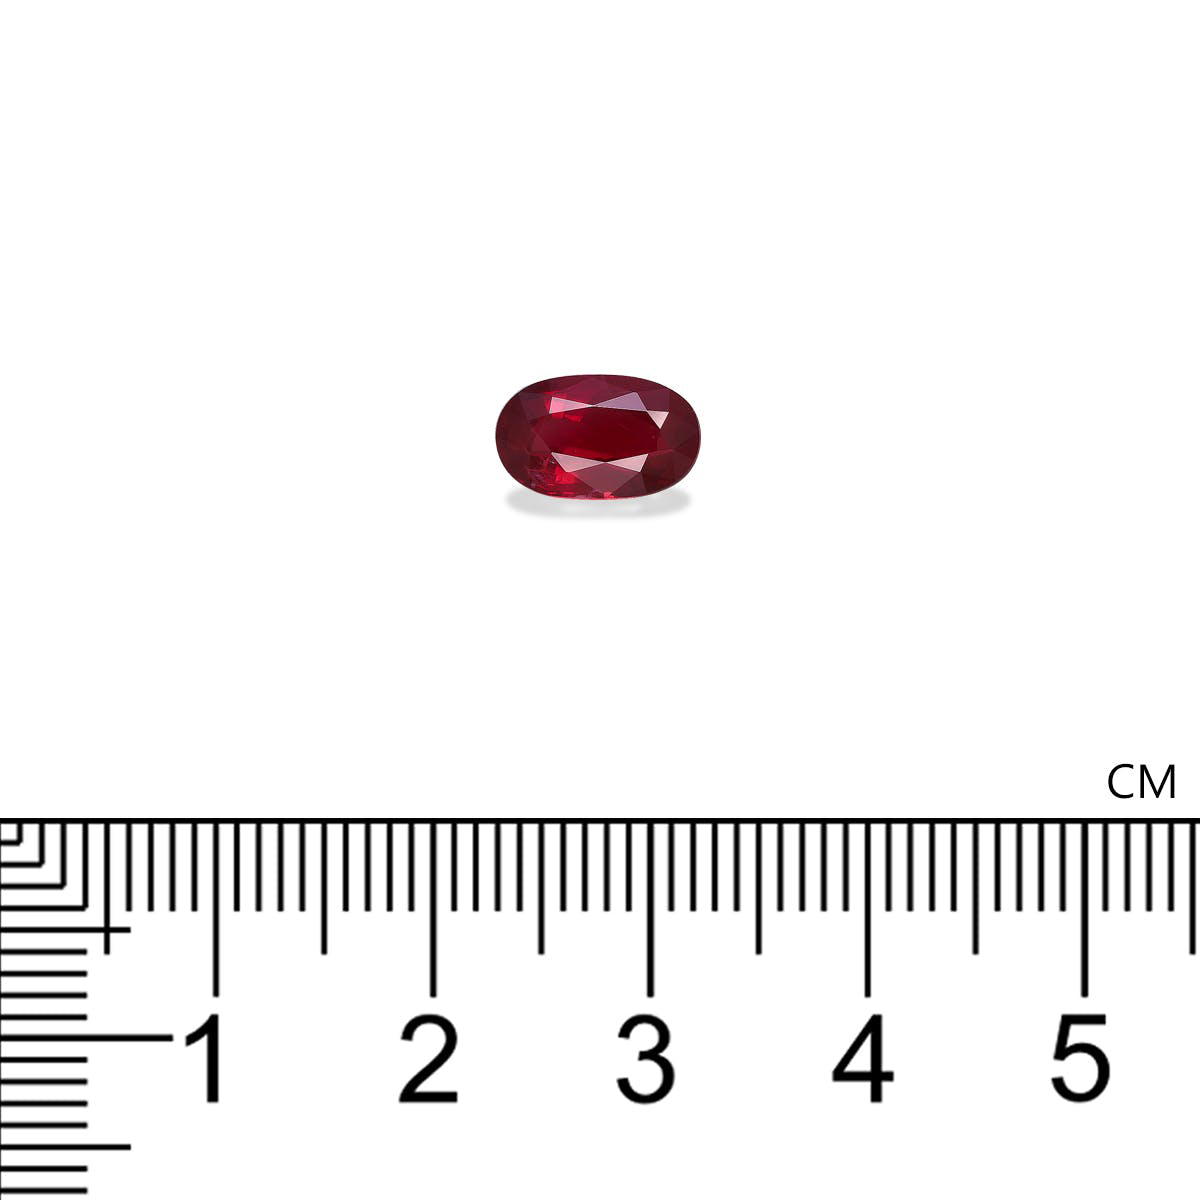 Picture of Pigeons Blood Unheated Mozambique Ruby 2.03ct (S7-45)